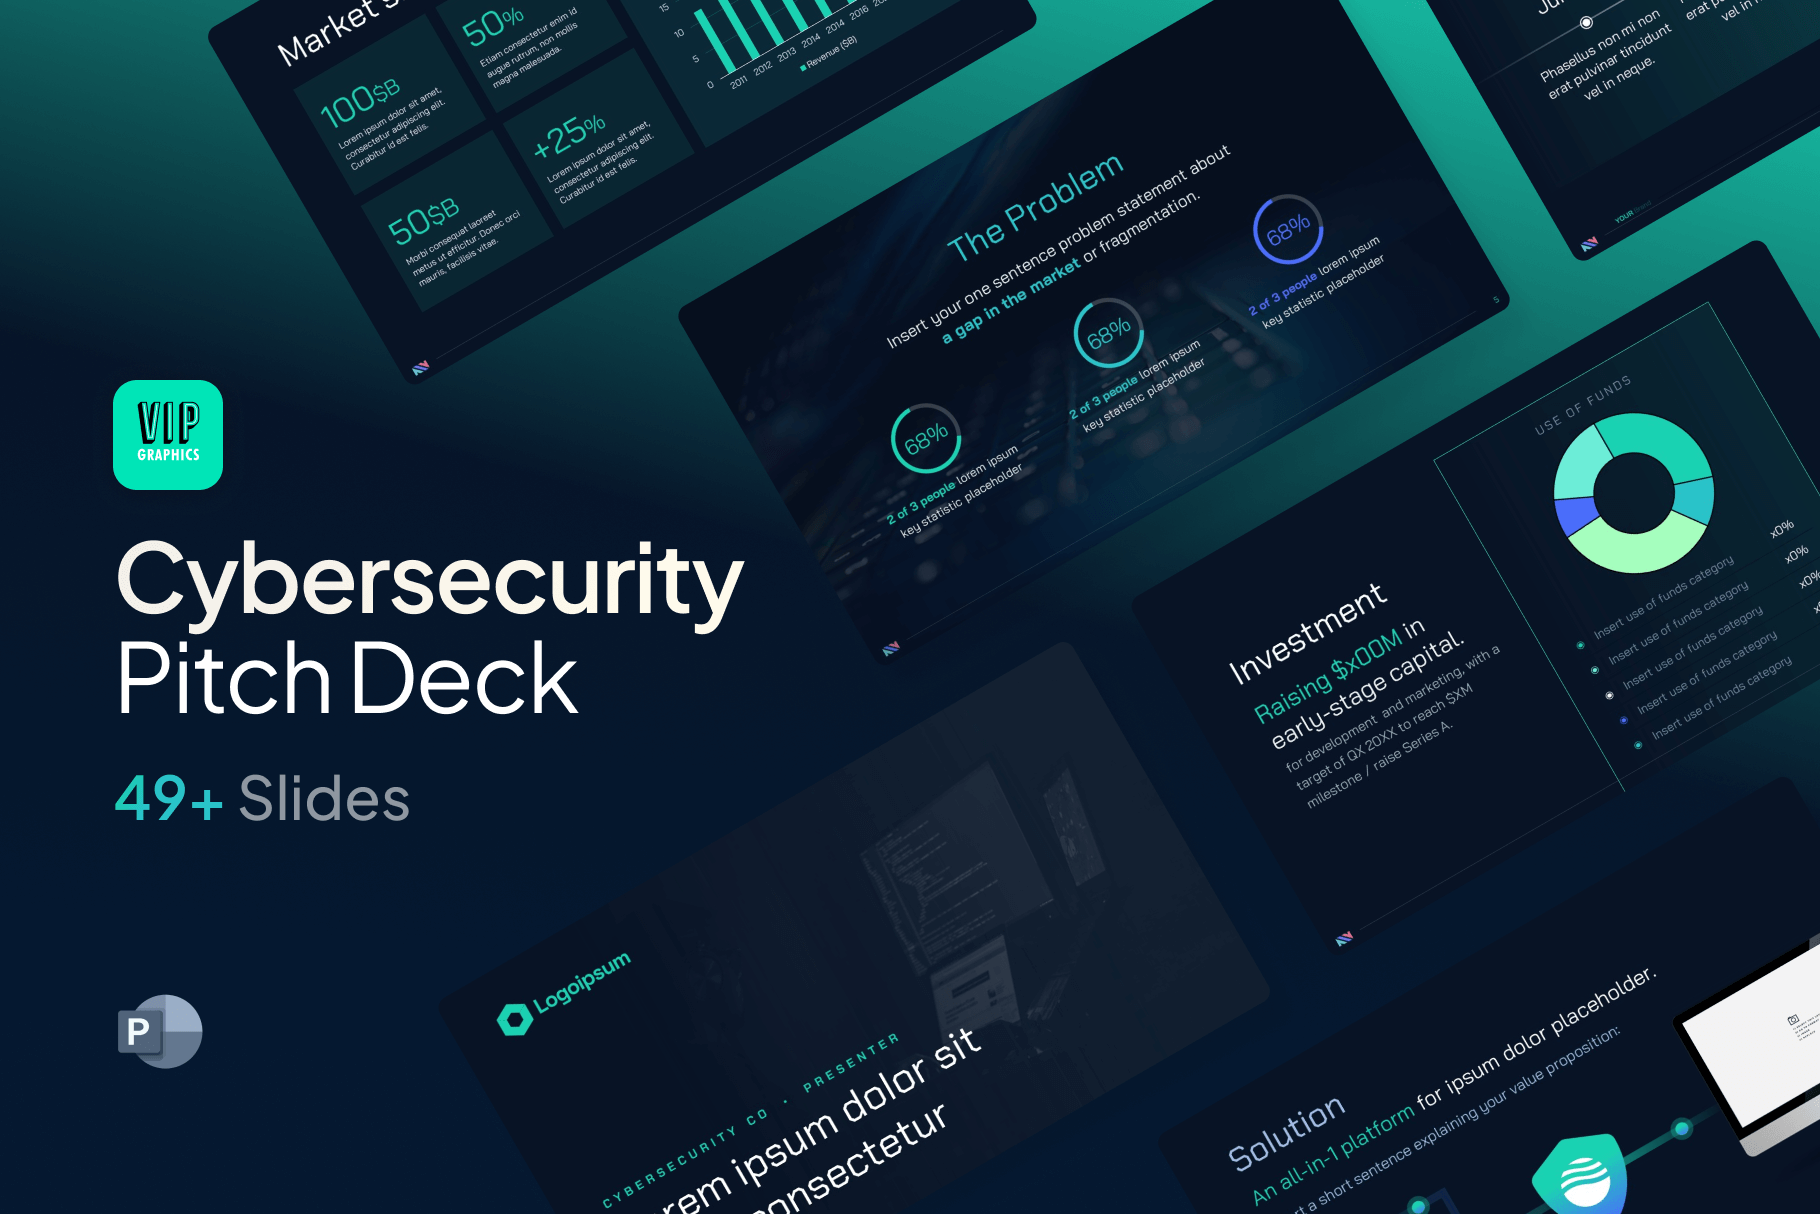 Cybersecurity Pitch Deck Template - Investor Presentation for cybersecurity startups | VIP Graphics